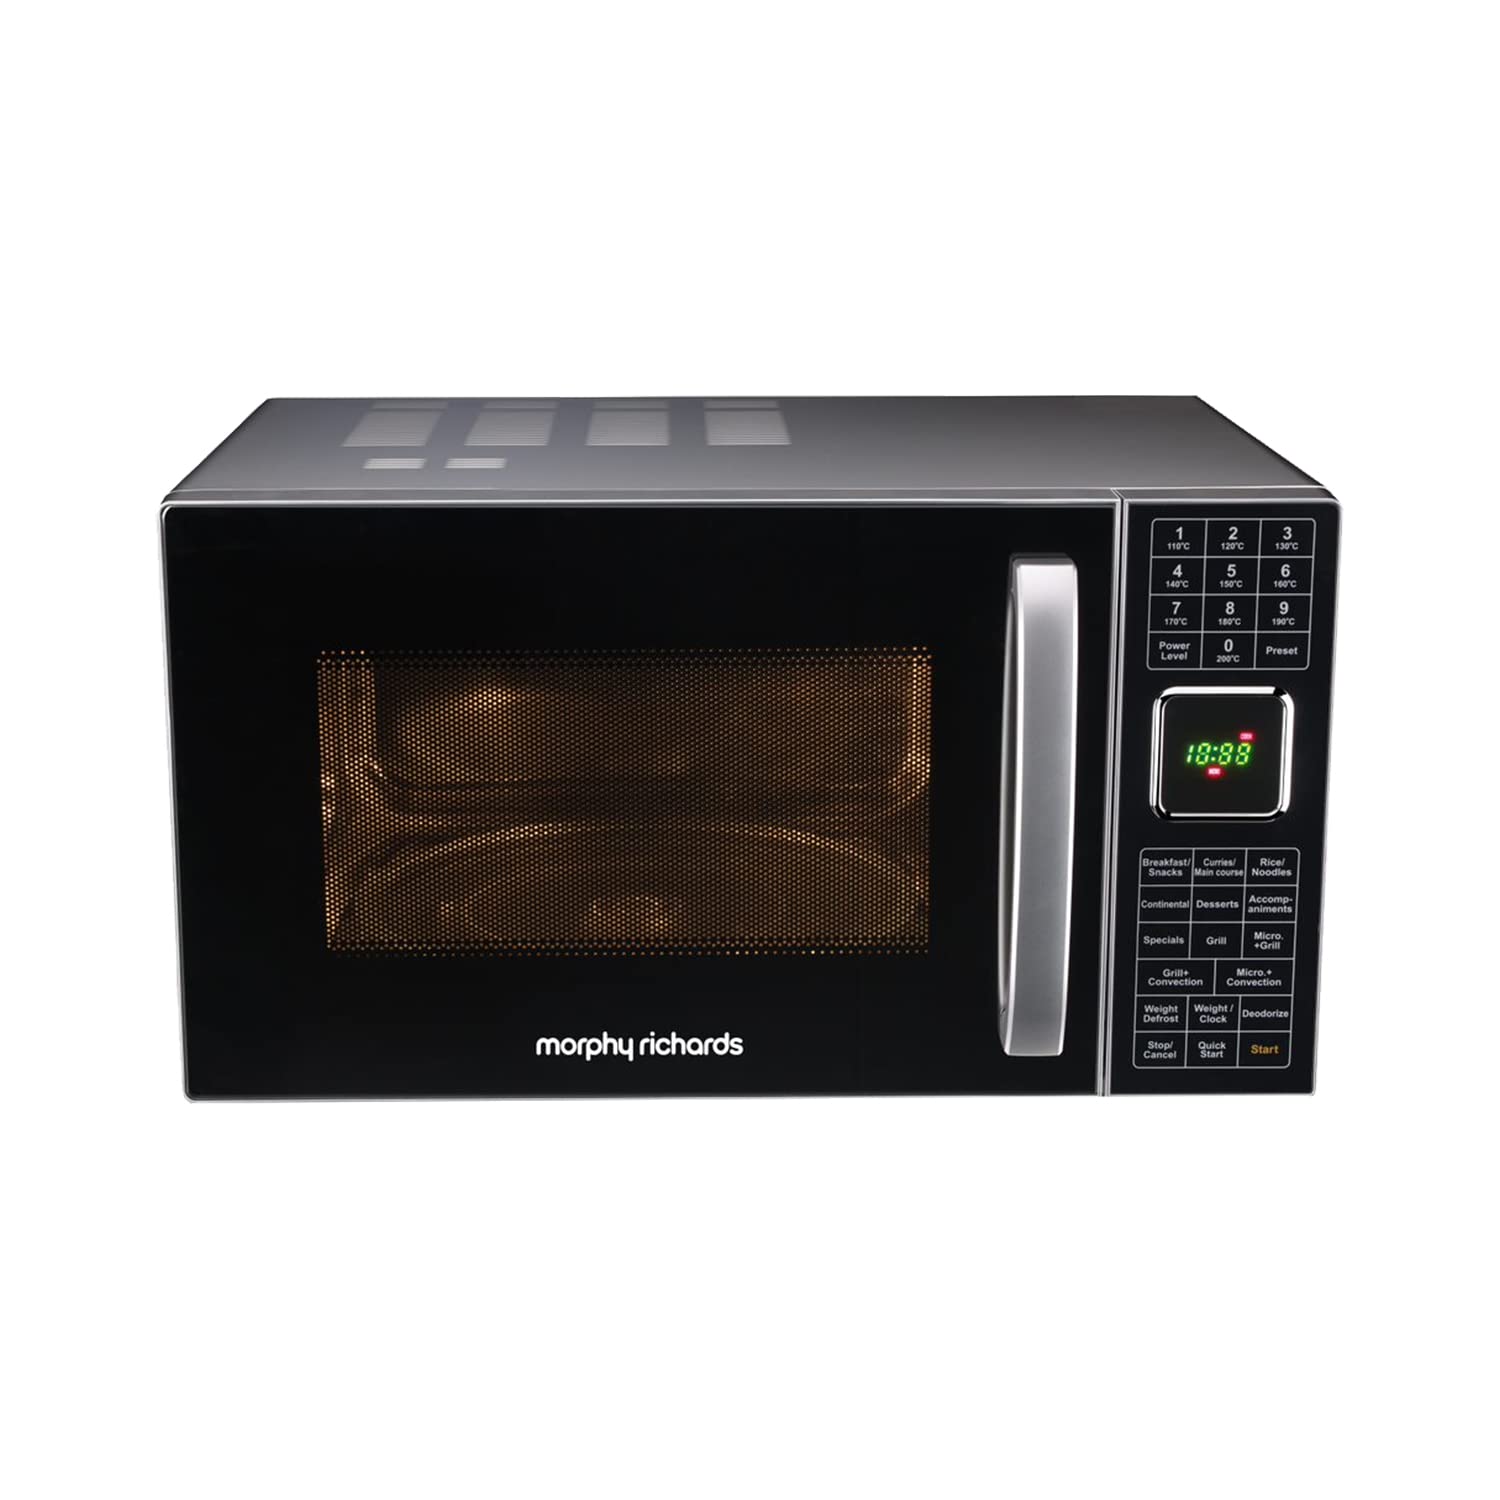 Morphy Richards Convection Microwave from Bajaj India